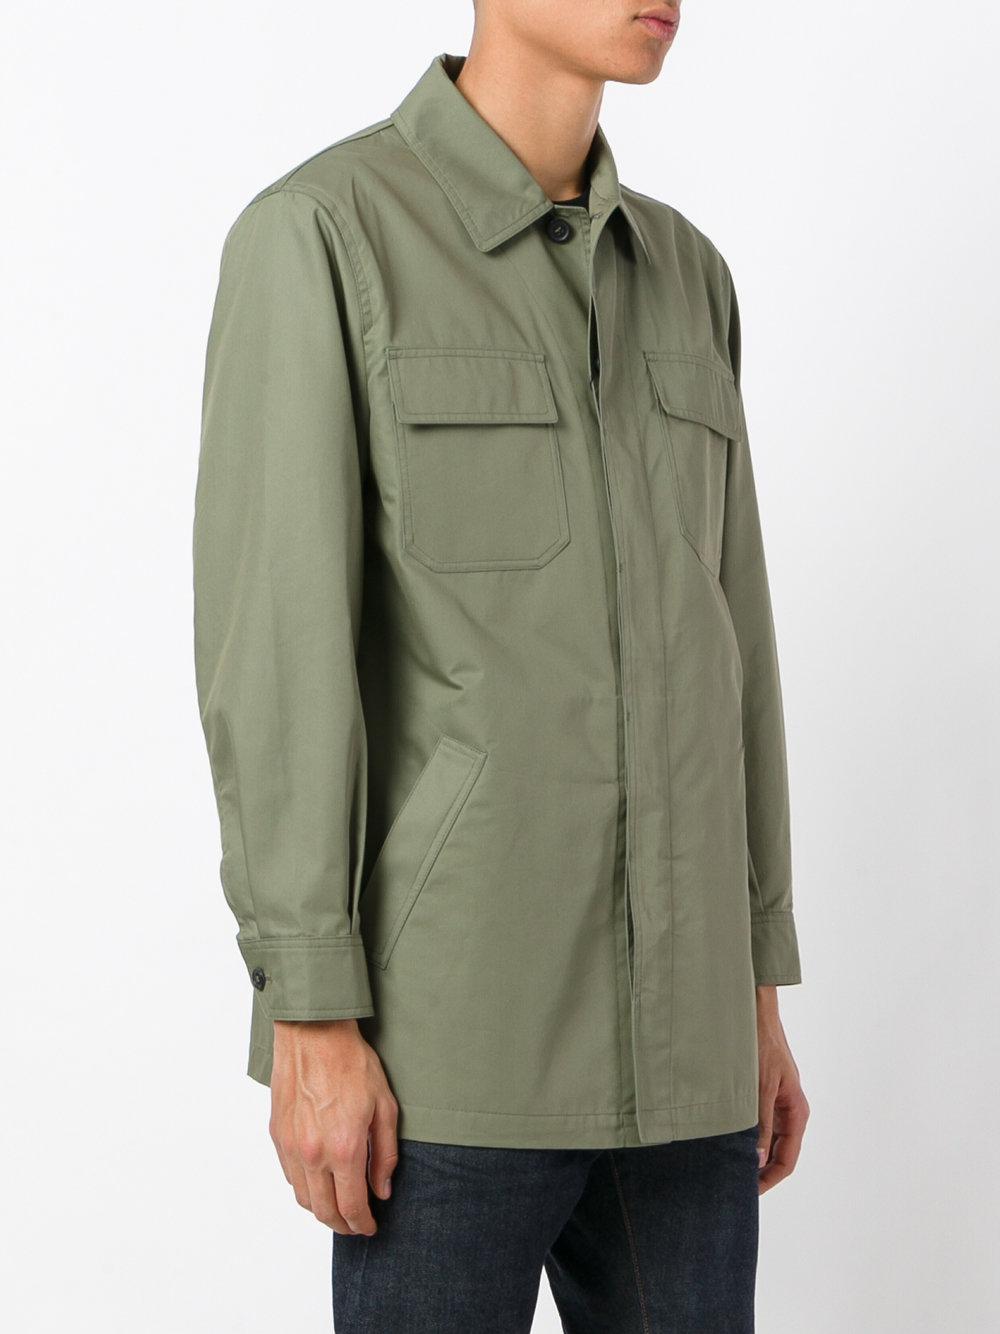 Lyst - Mackintosh Button-up Field Jacket in Green for Men